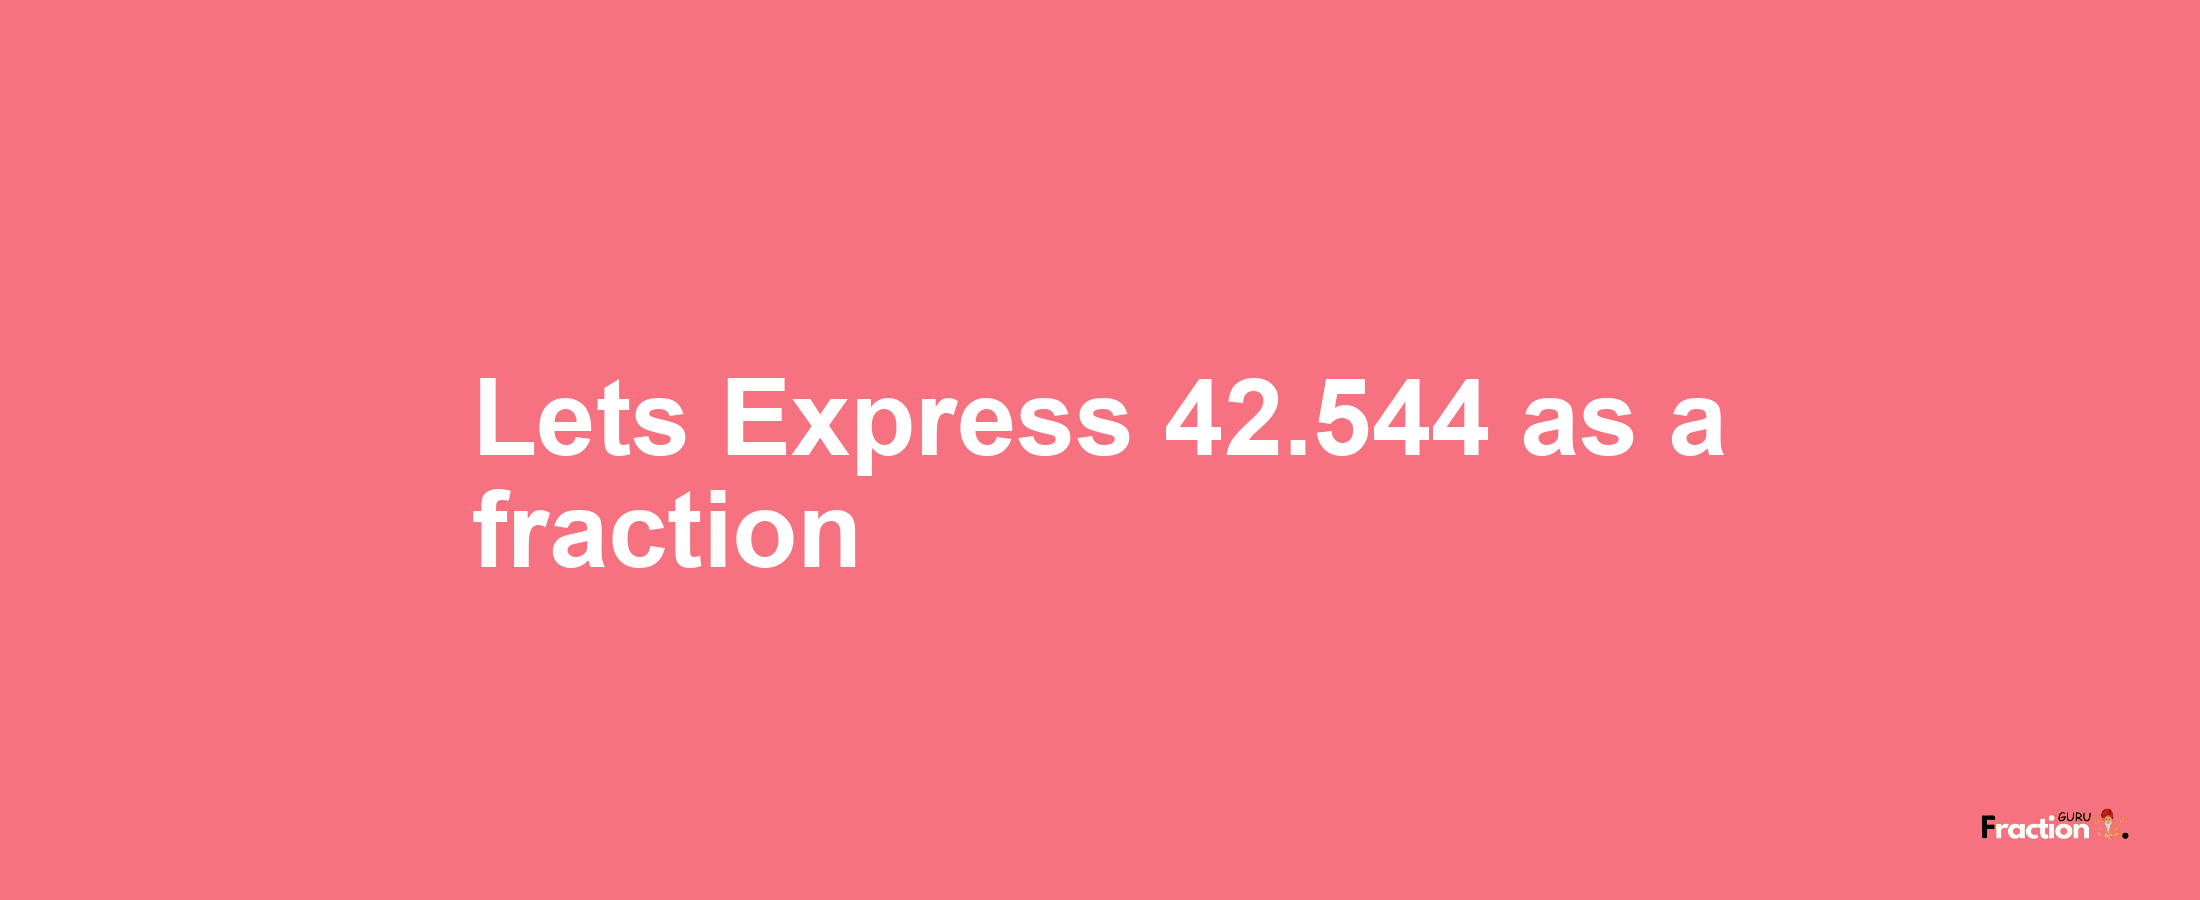 Lets Express 42.544 as afraction